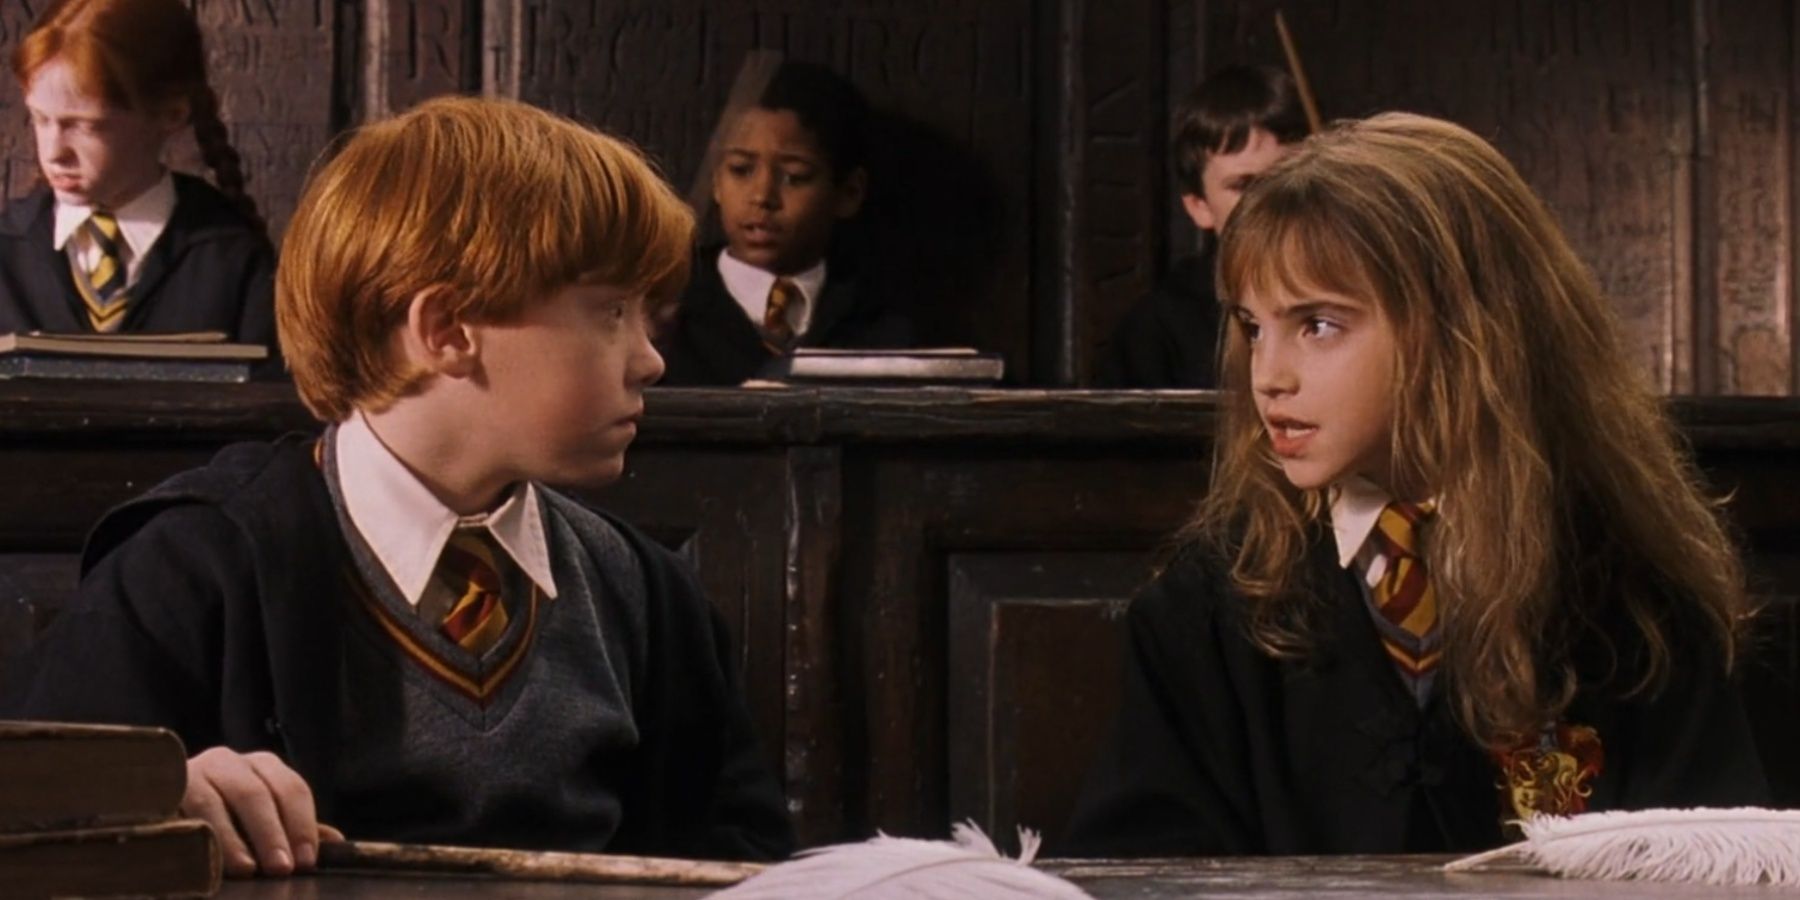 Ron Weasley and Hermione Granger in Harry Potter and the Sorcerer's Stone.